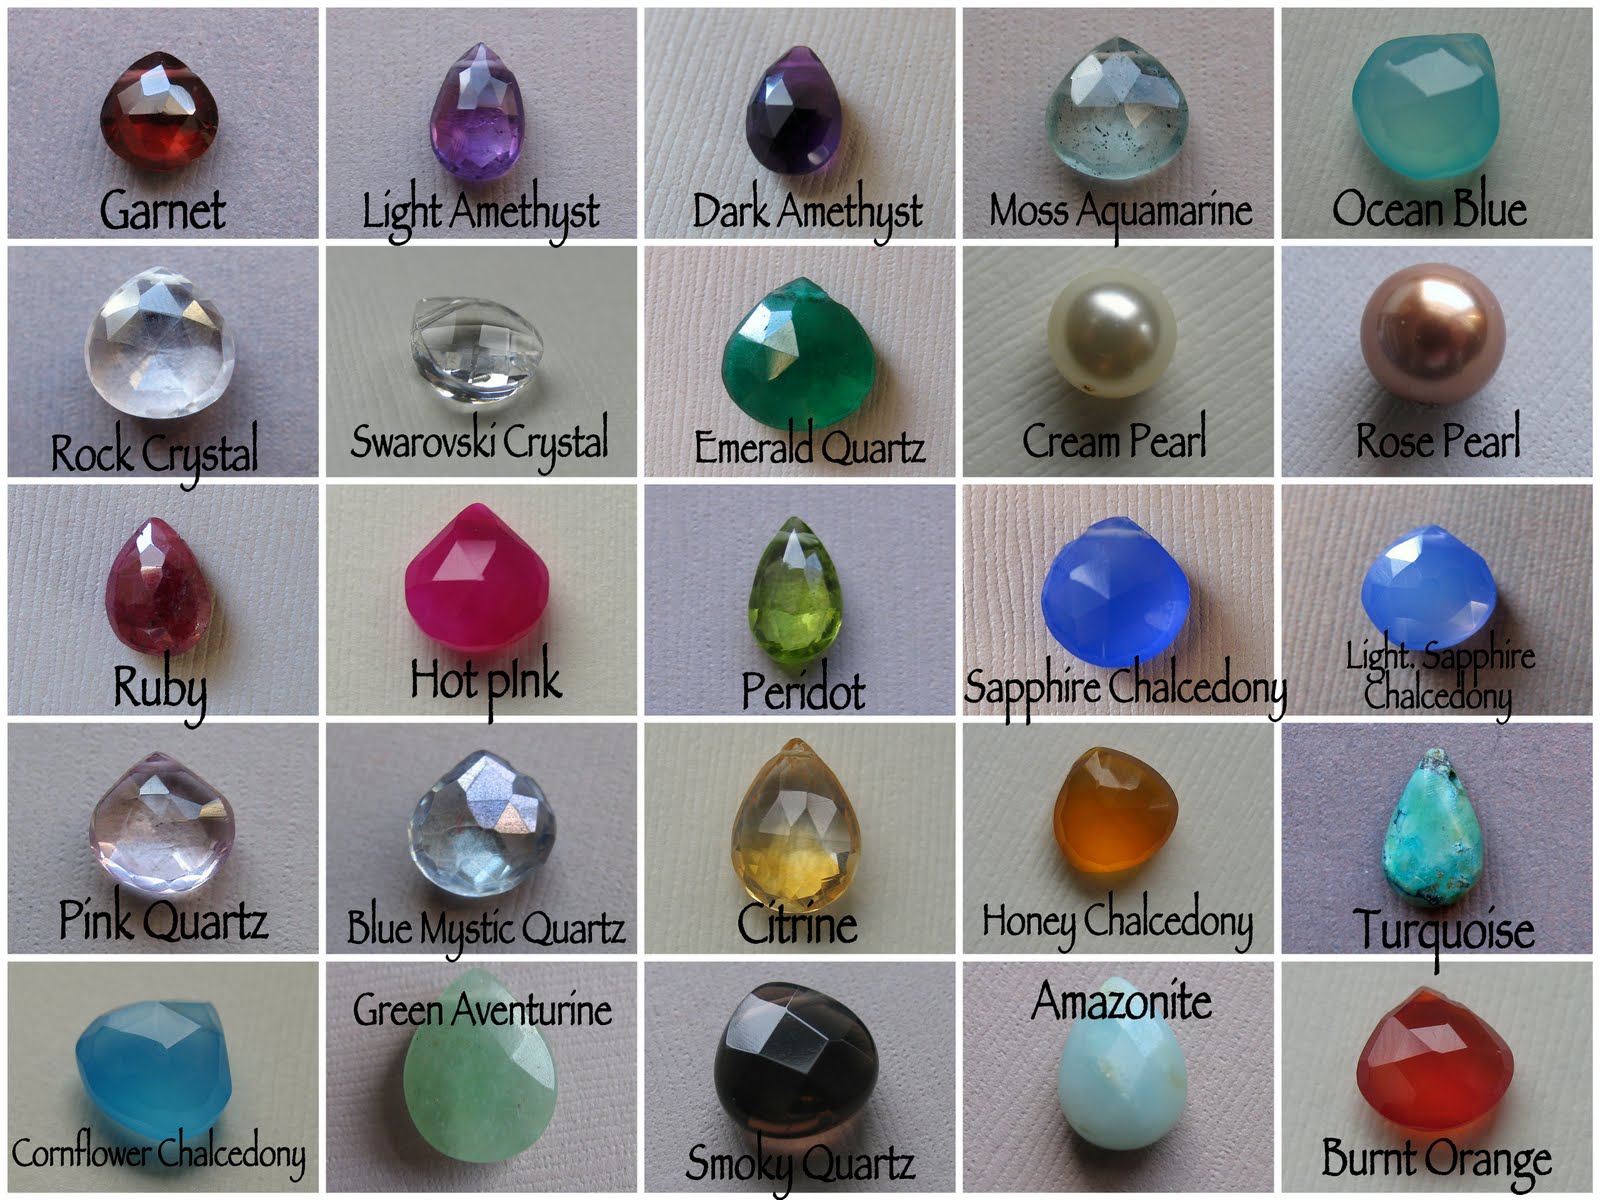 Color Stone Chart